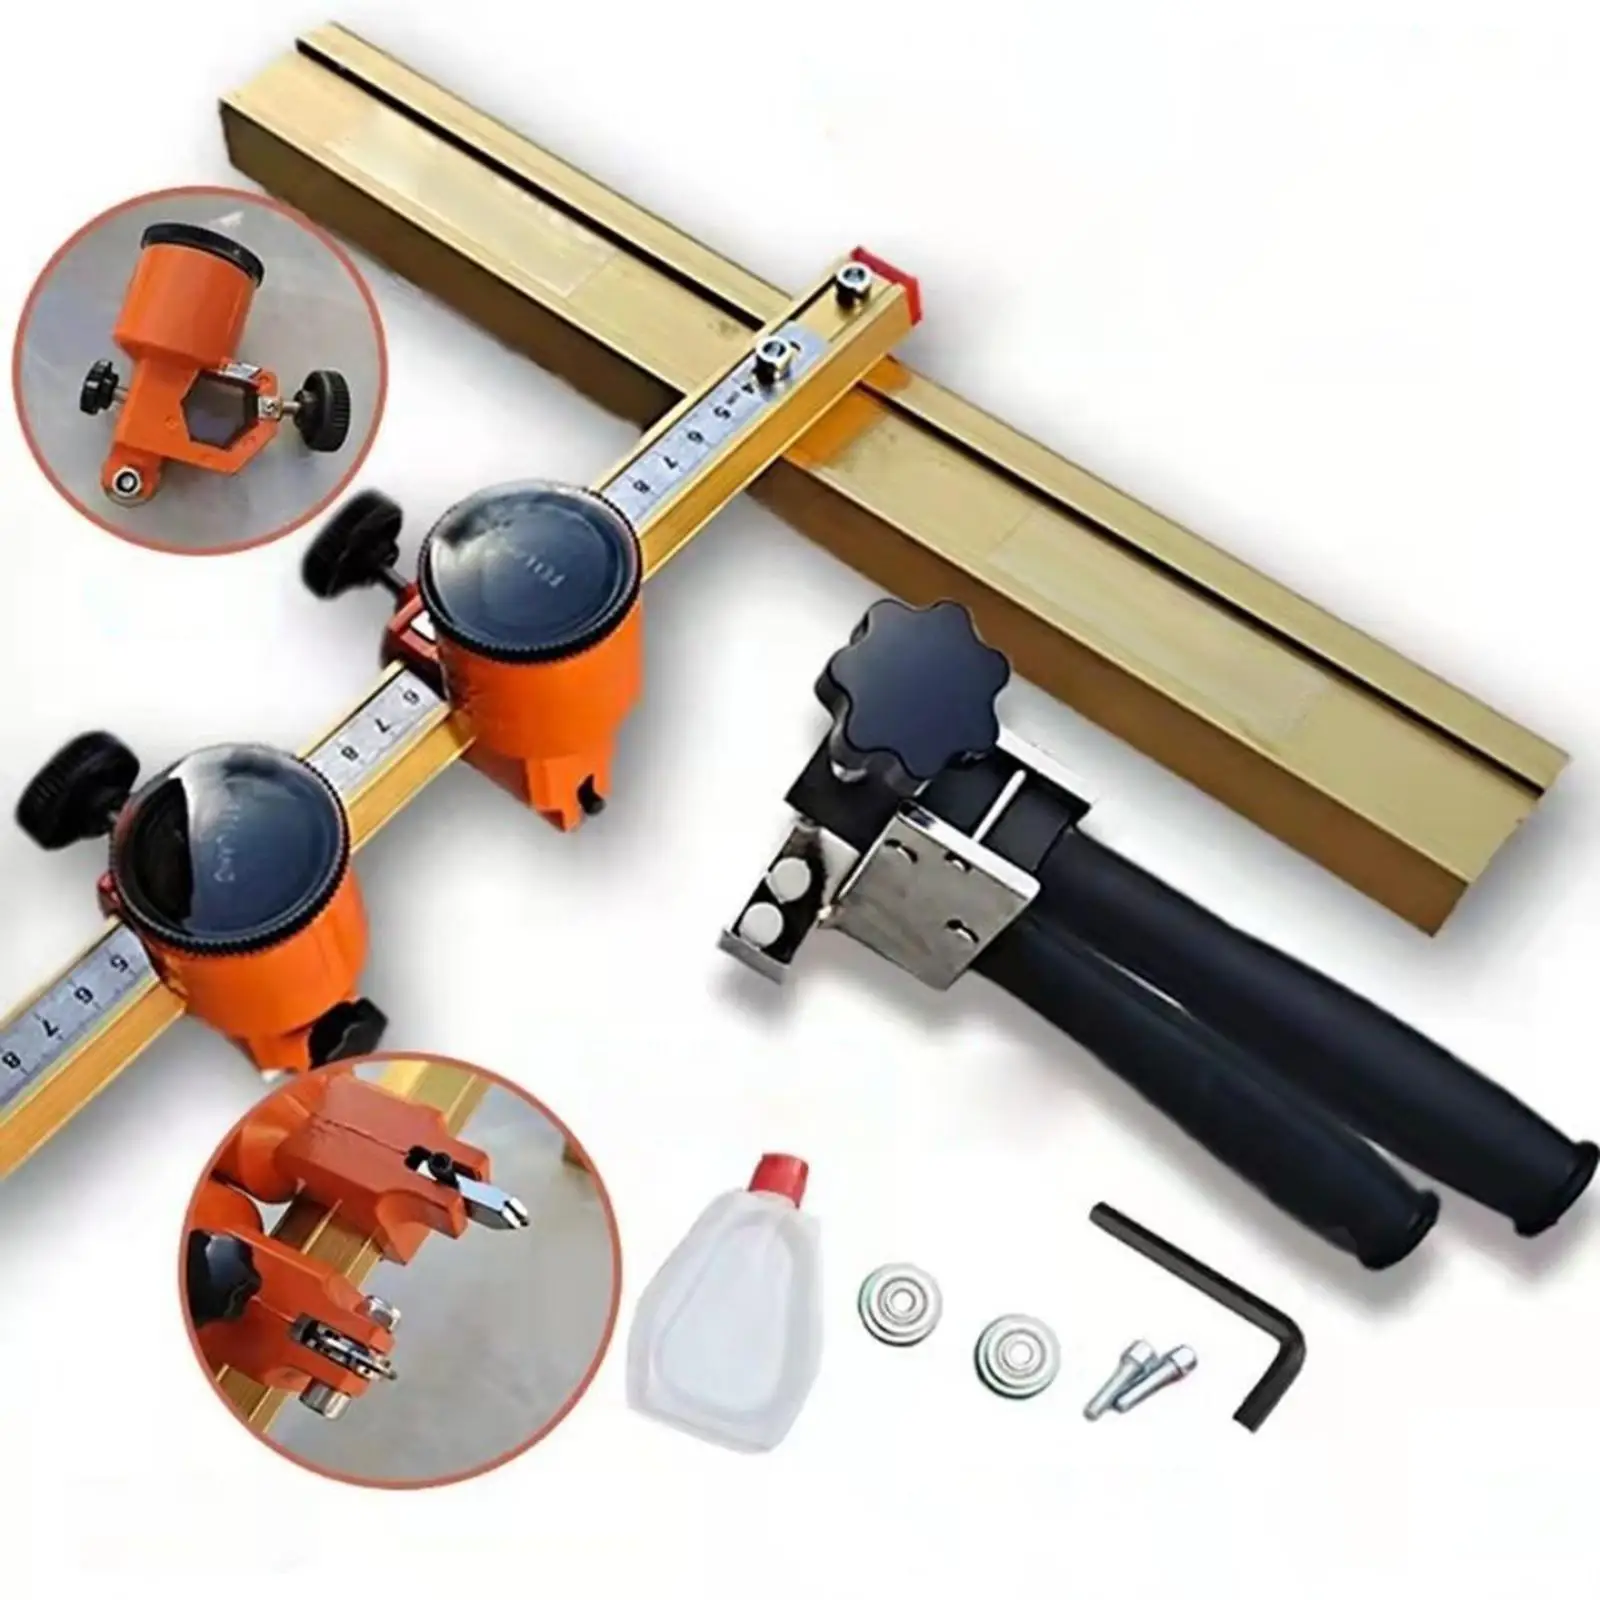 Glass Cutter Glass Tile Cutter Durable with Automatic Oil feed Ergonomic Crafts DIY Project Hand Tool for Ceramic Tile Mirrors